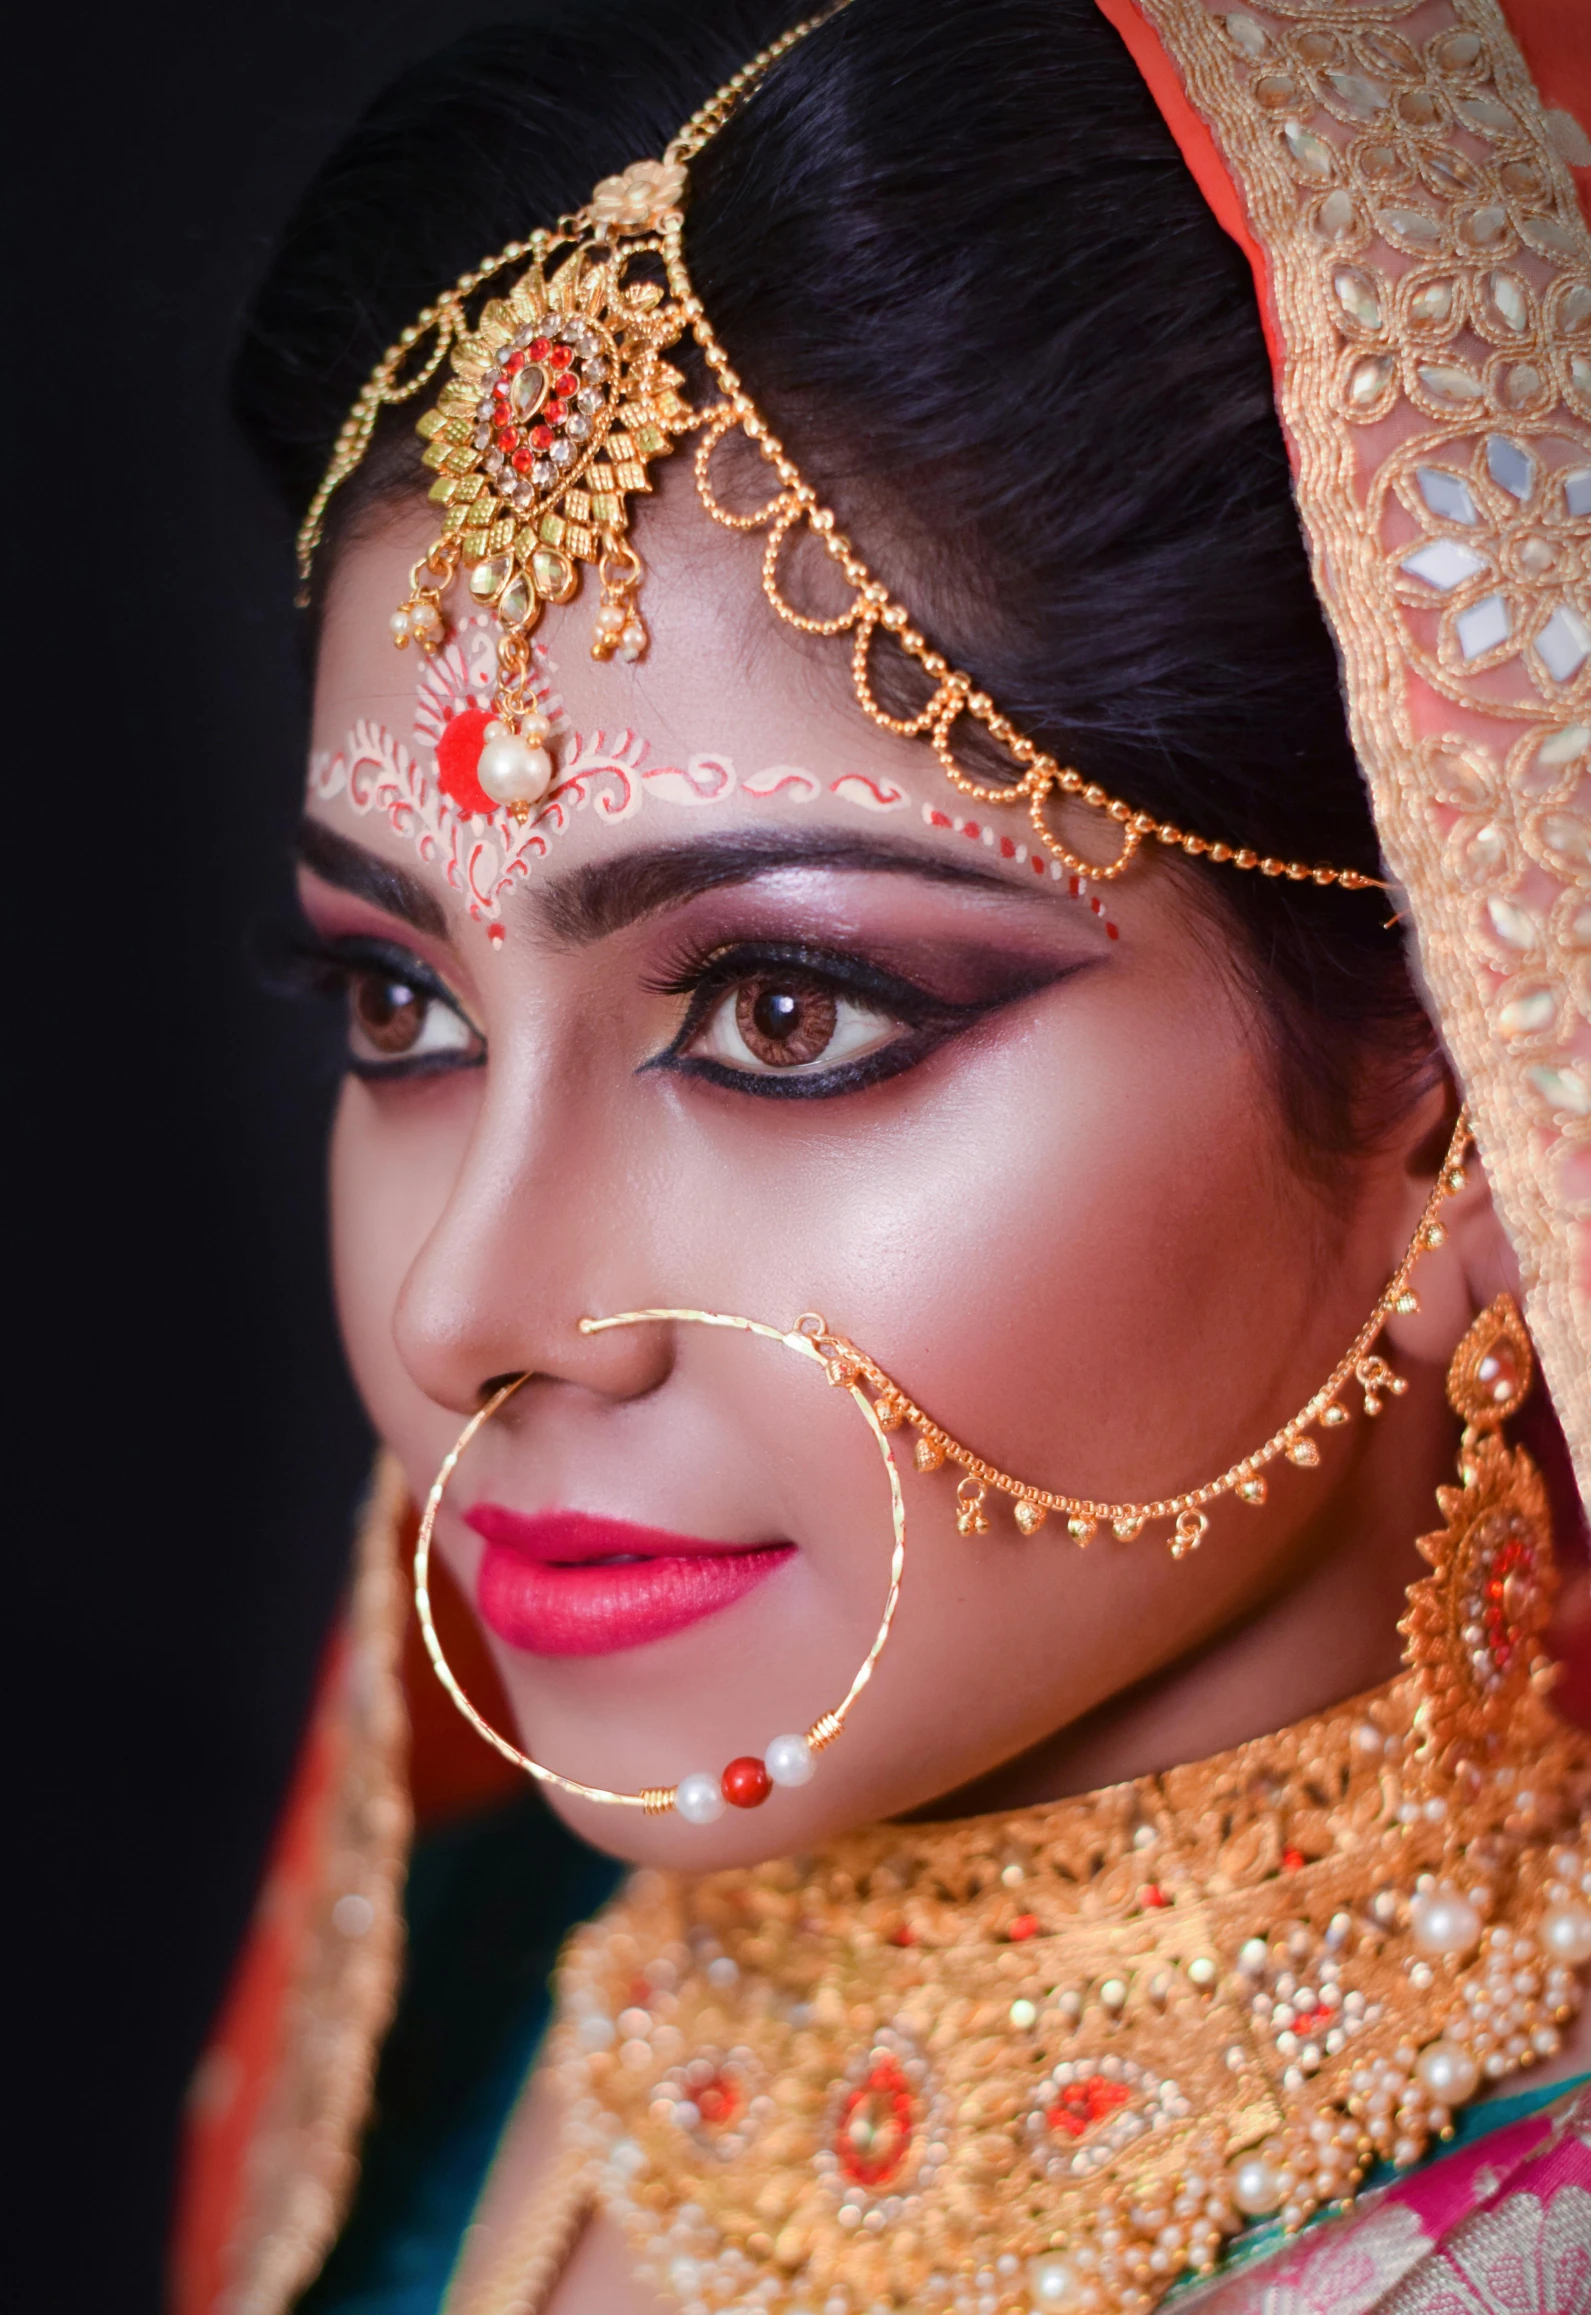 a beautiful woman wearing jewelry on her face